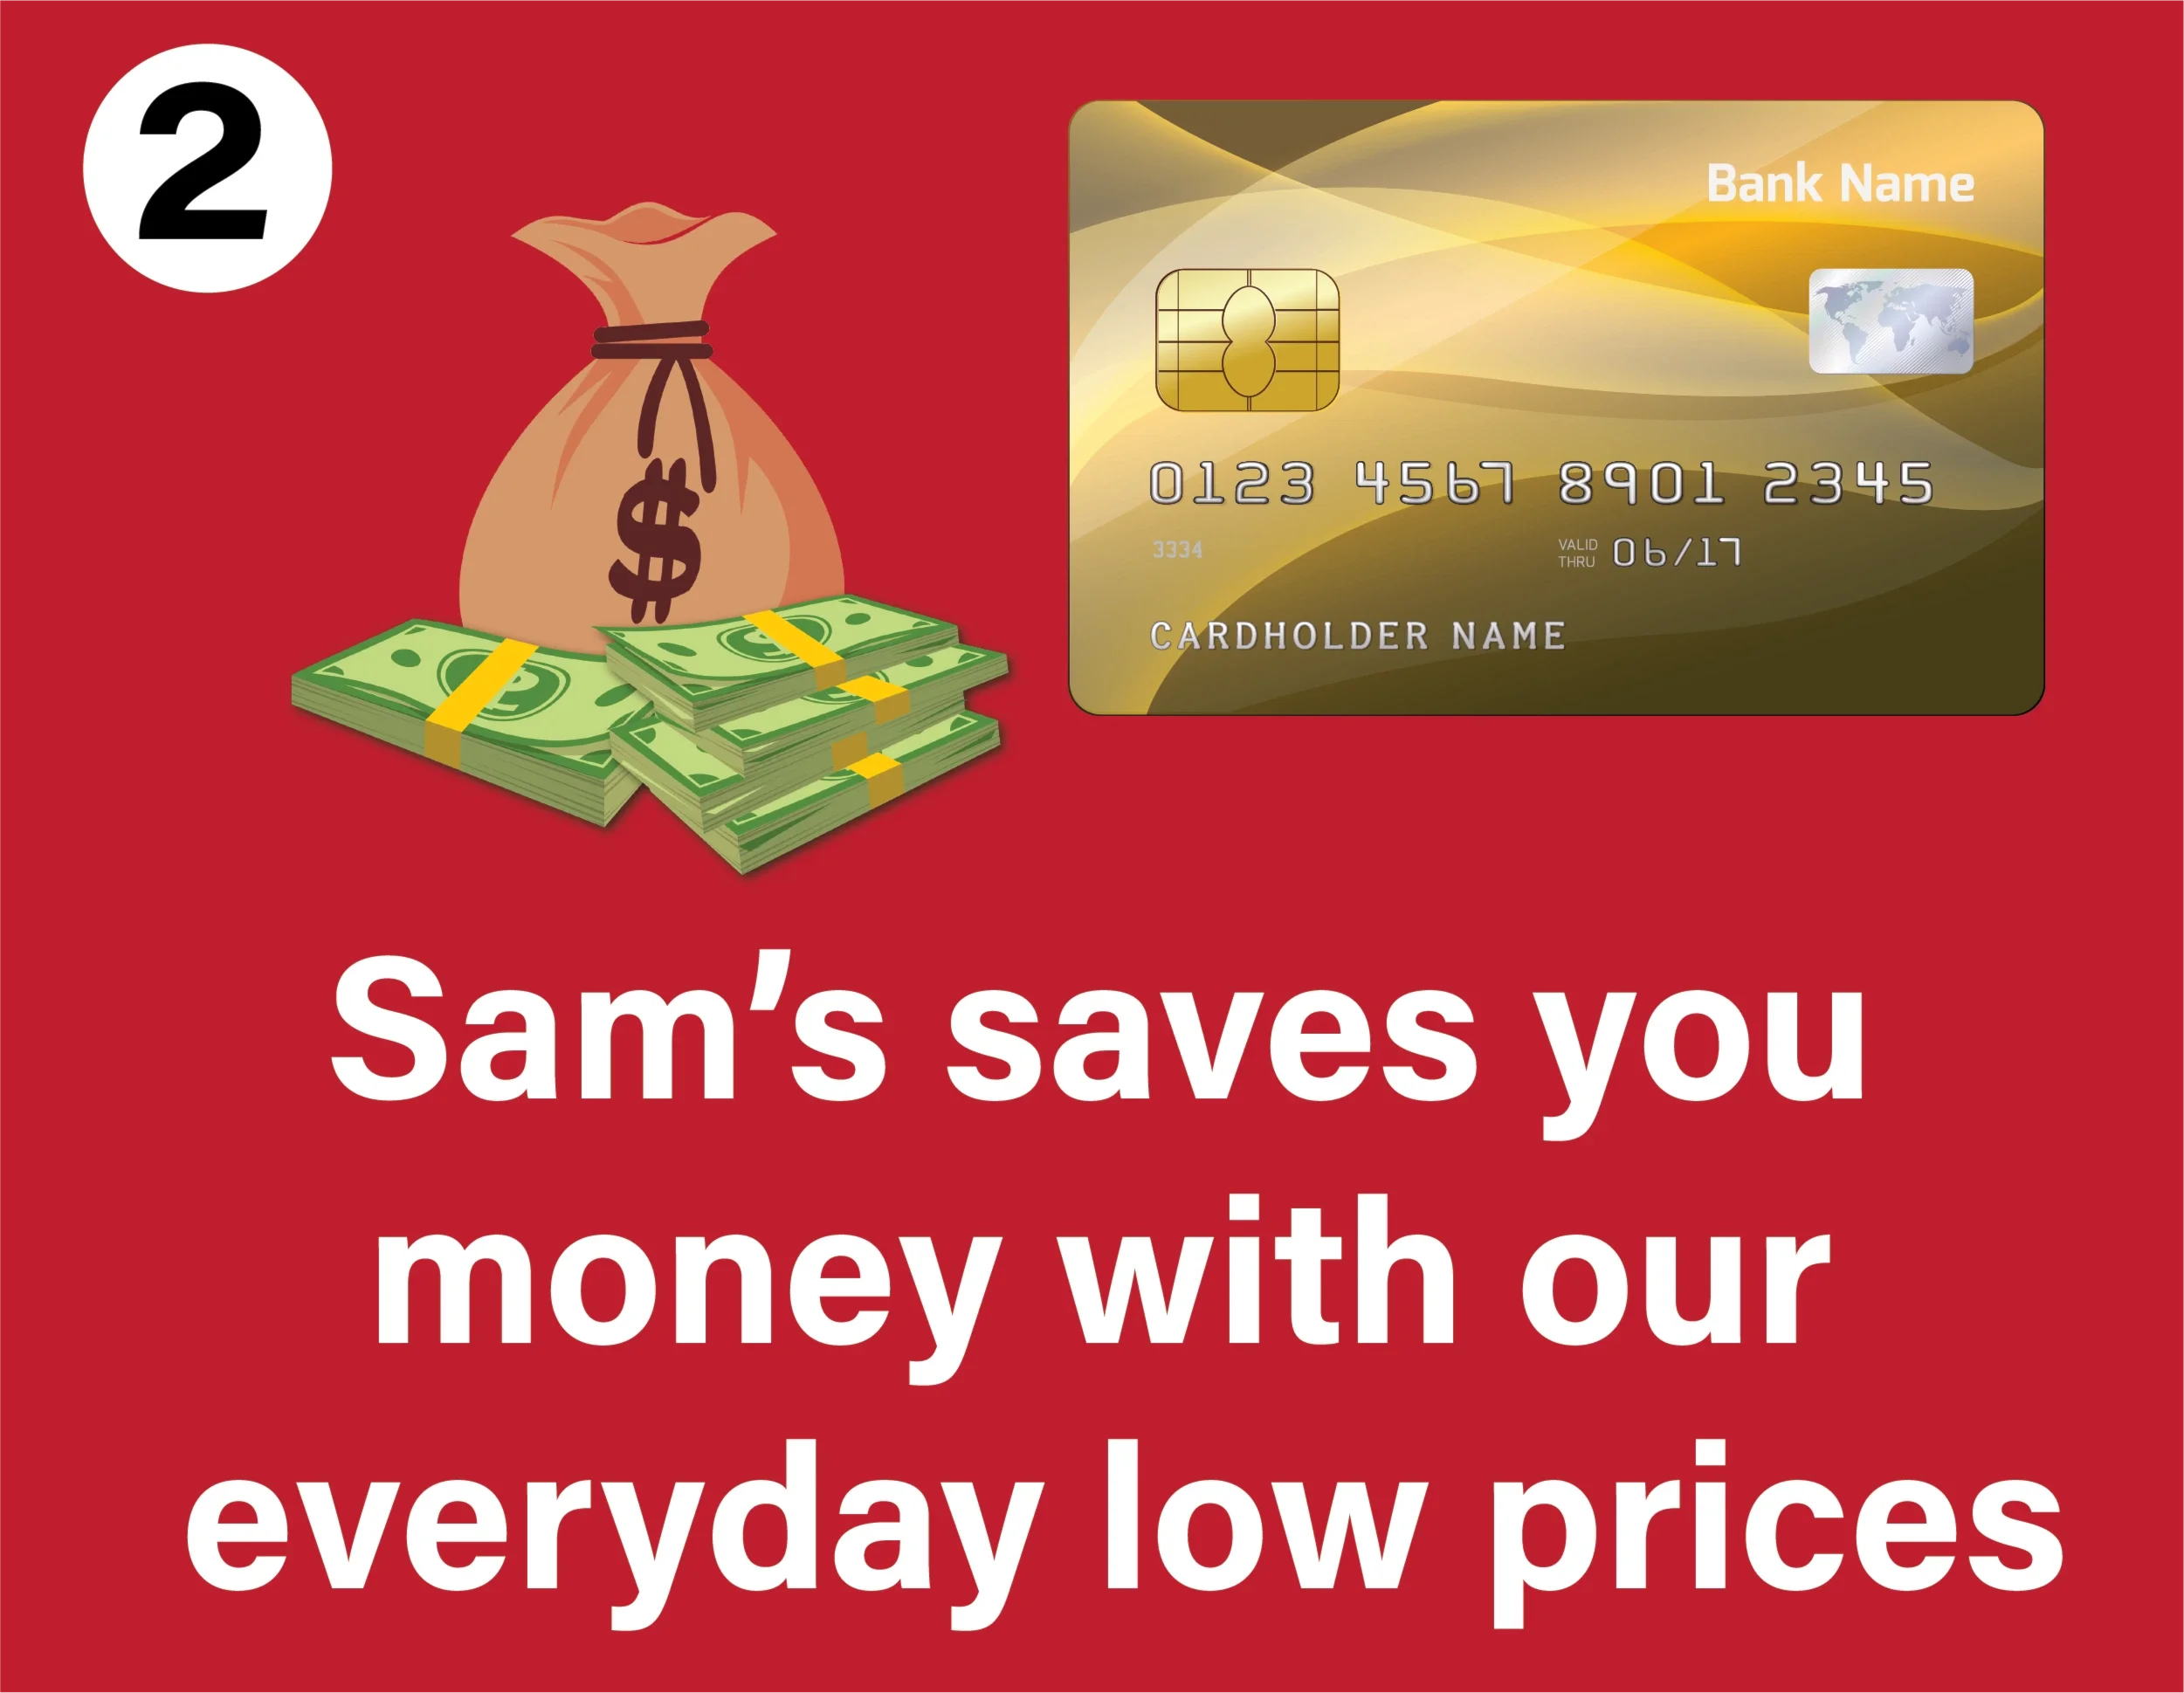 Sam's saves you money with our everyday low prices